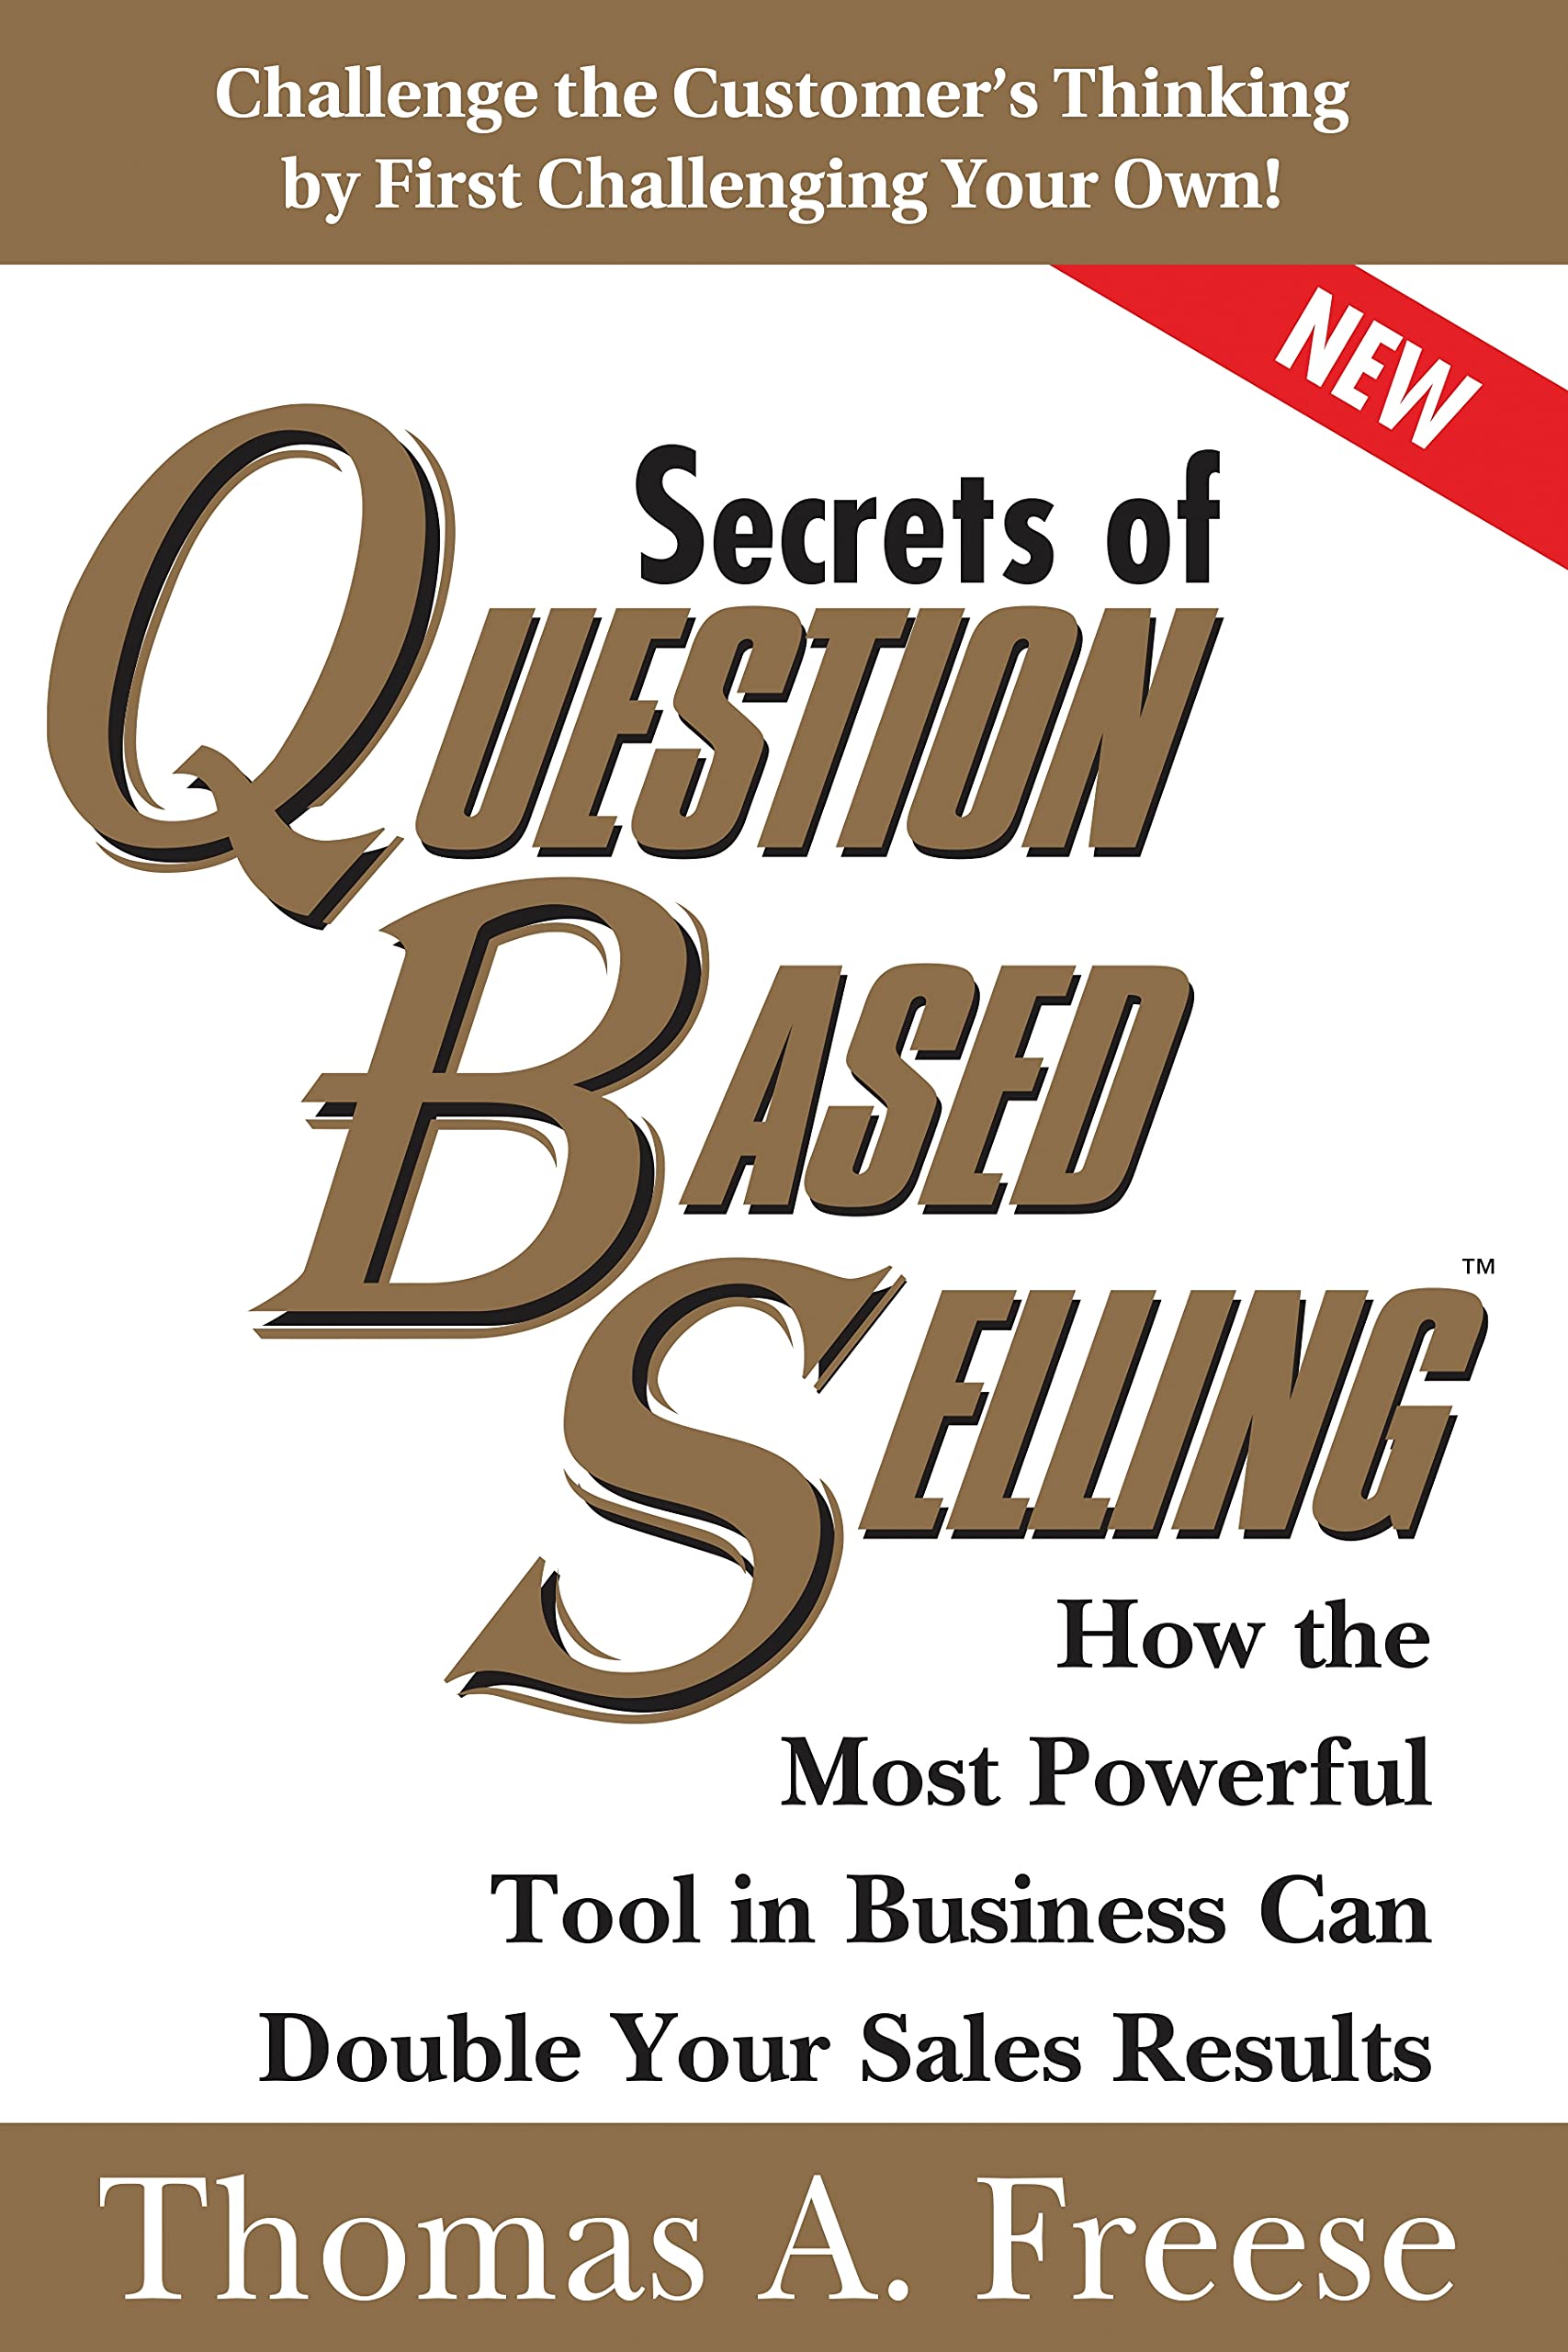 Secrets of question based selling 